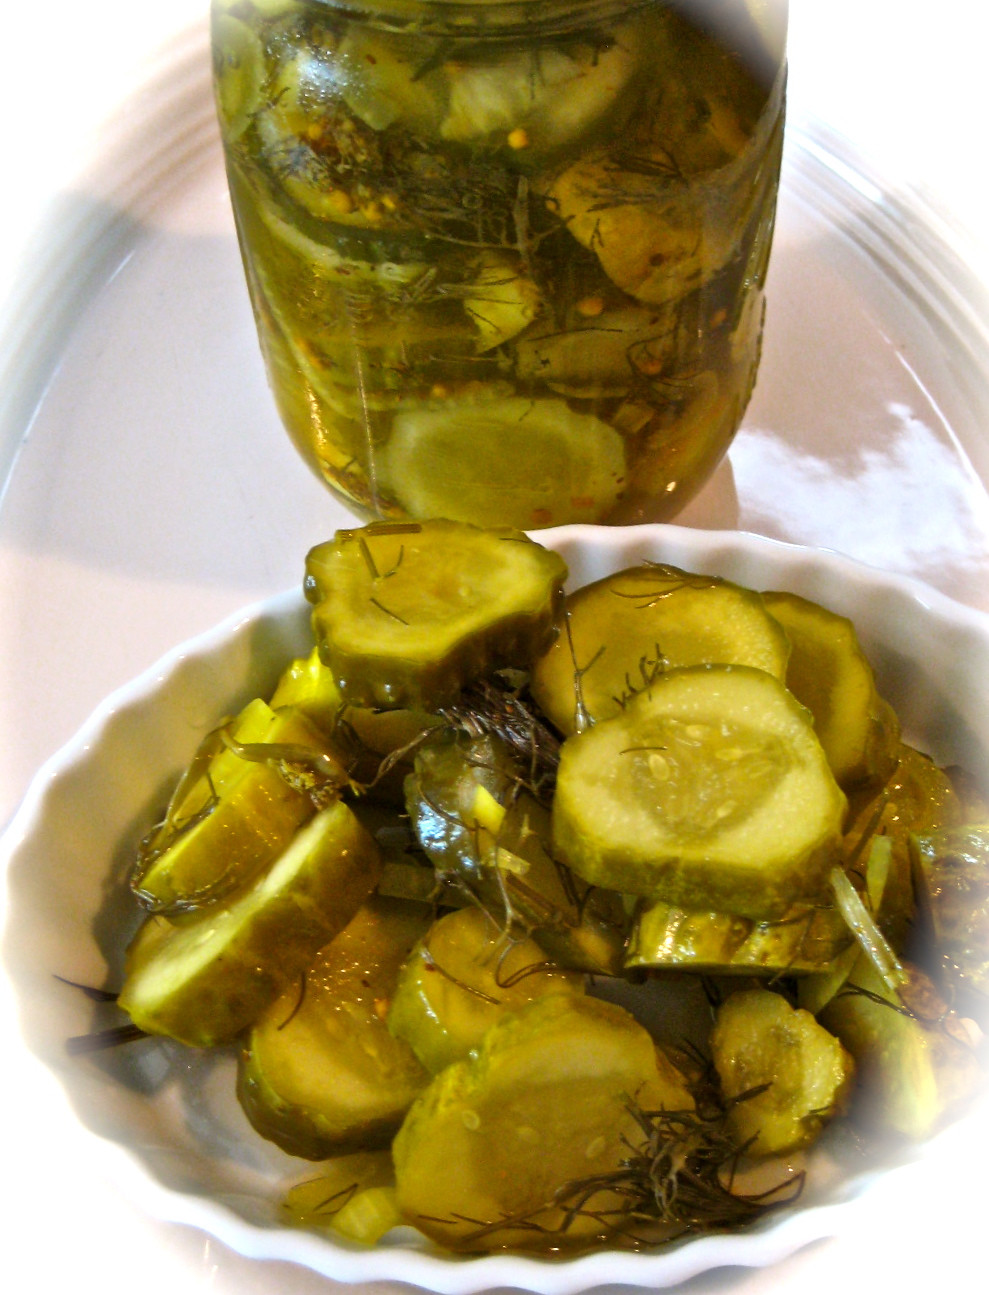 Refrigerator Bread And Butter Pickle Recipe
 Karen B s Cooking Made Easy Easy Refrigerator Bread and